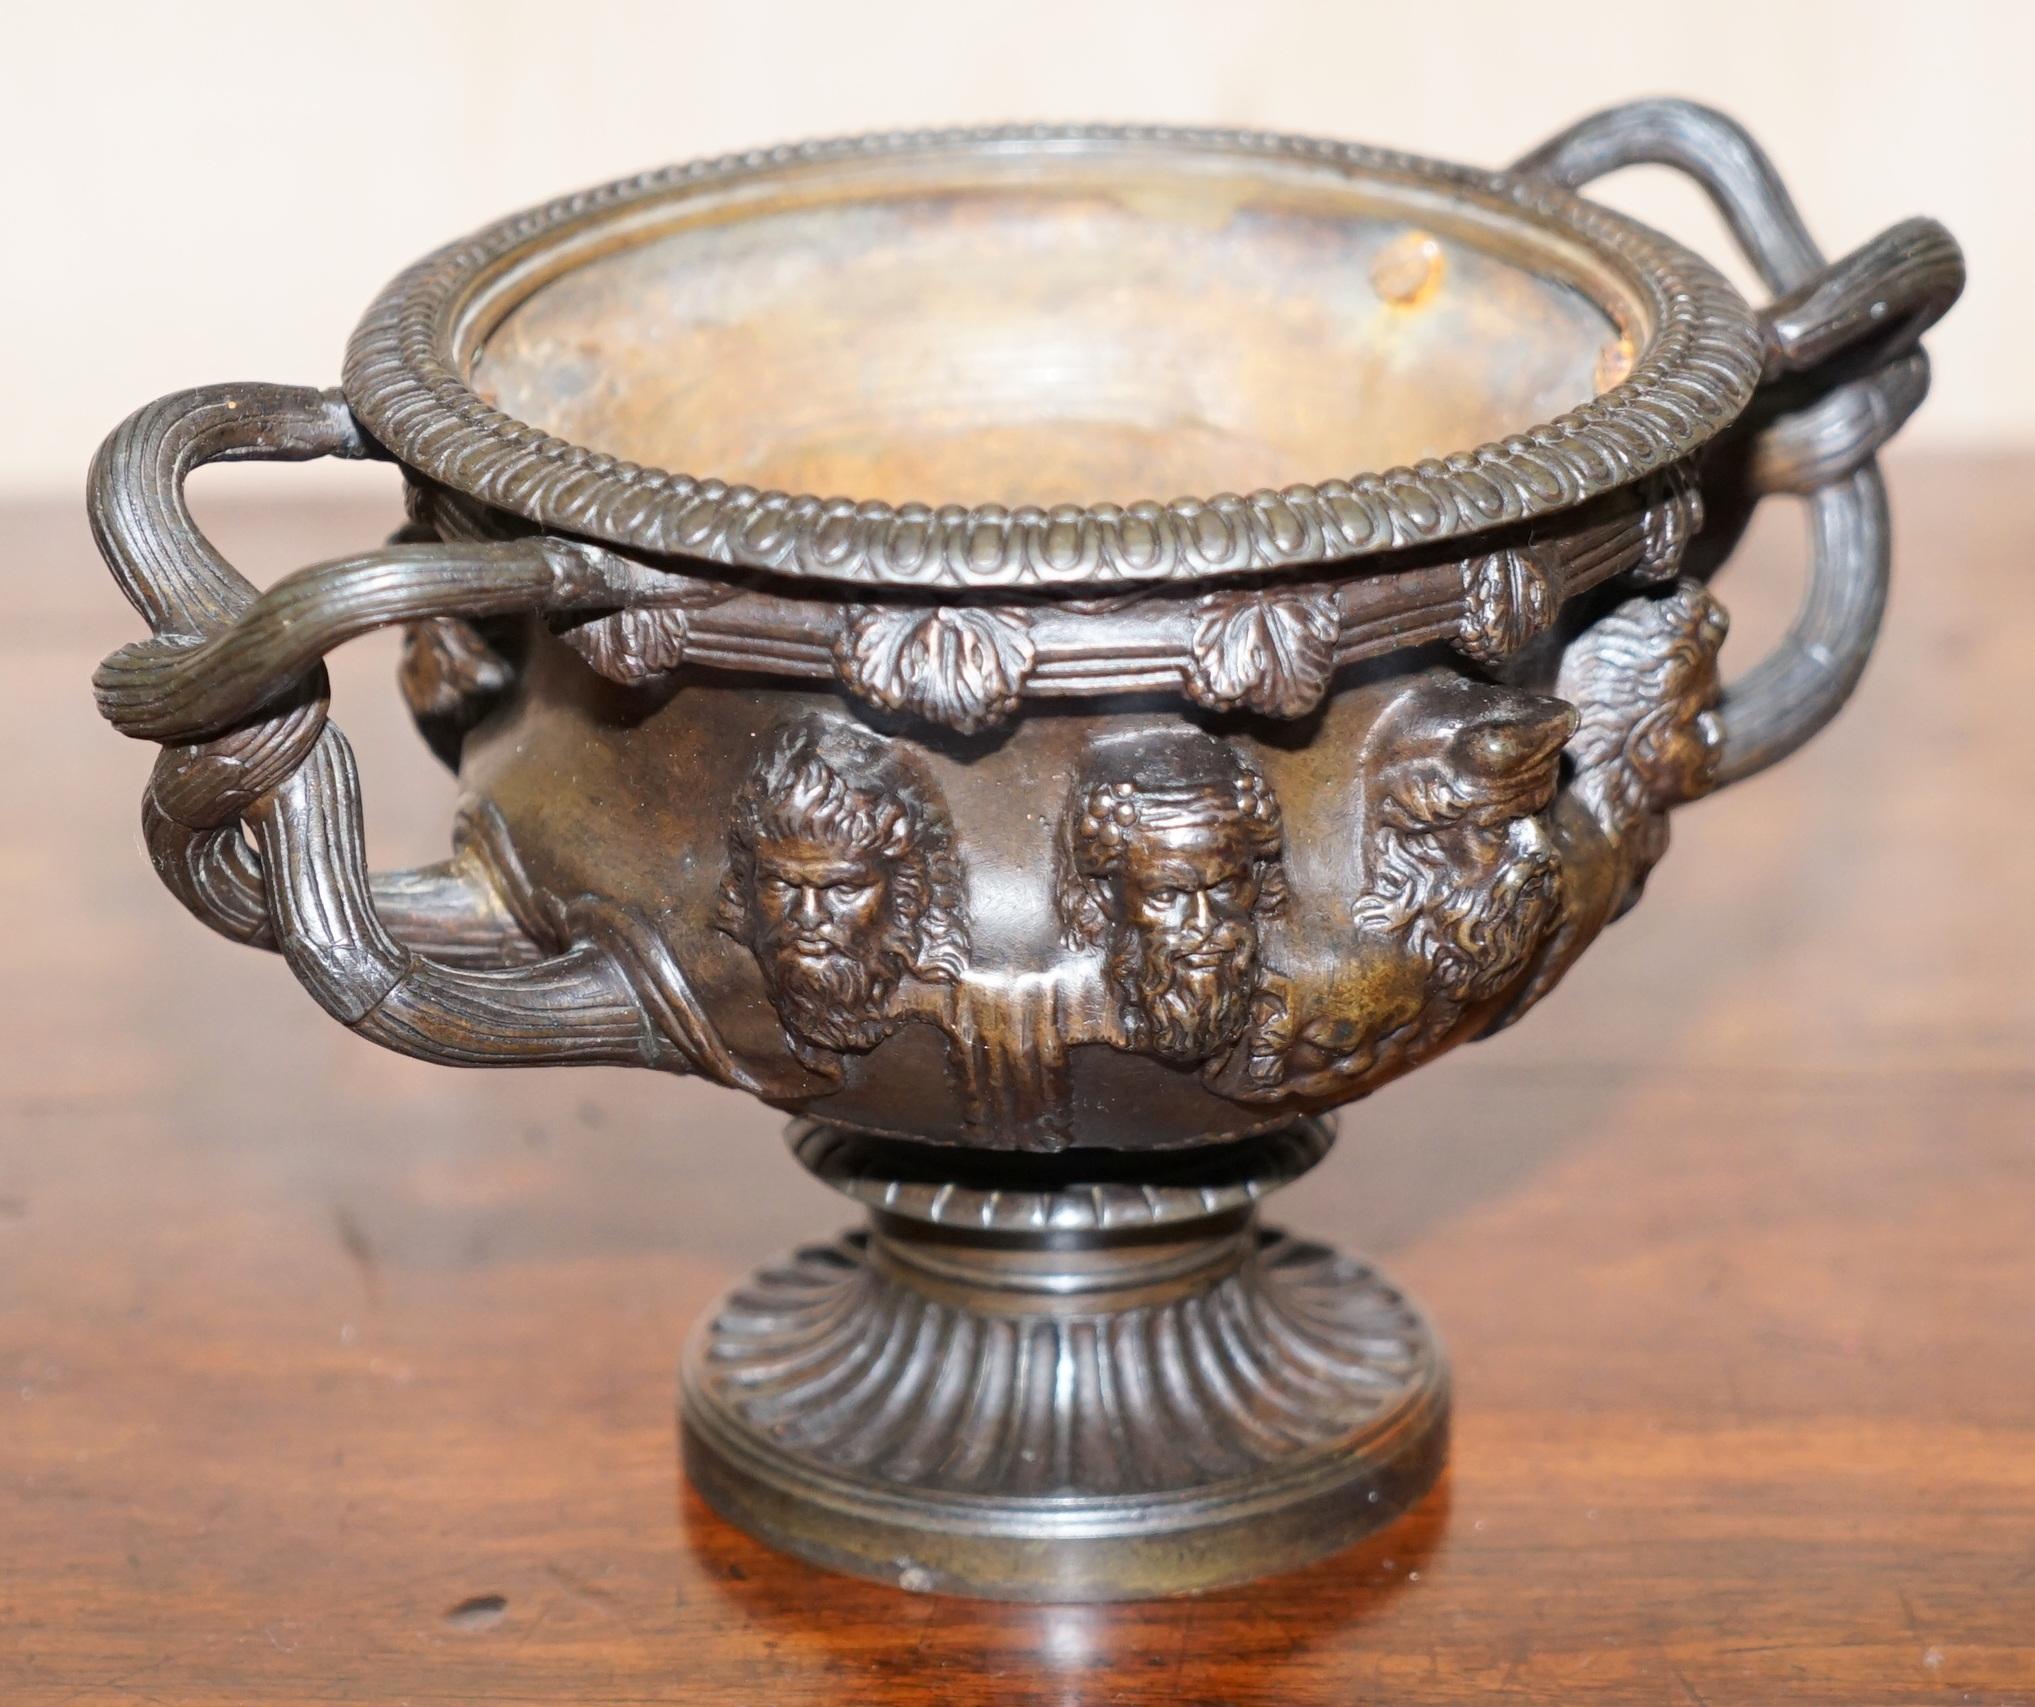 We are delighted to offer for sale this stunning solid bronze Grand Tour Warwick vase based on the original Roman

An exquisite example in beautiful condition throughout, the vase top rotates and is on a pivot, the bronze is nicely cast and very